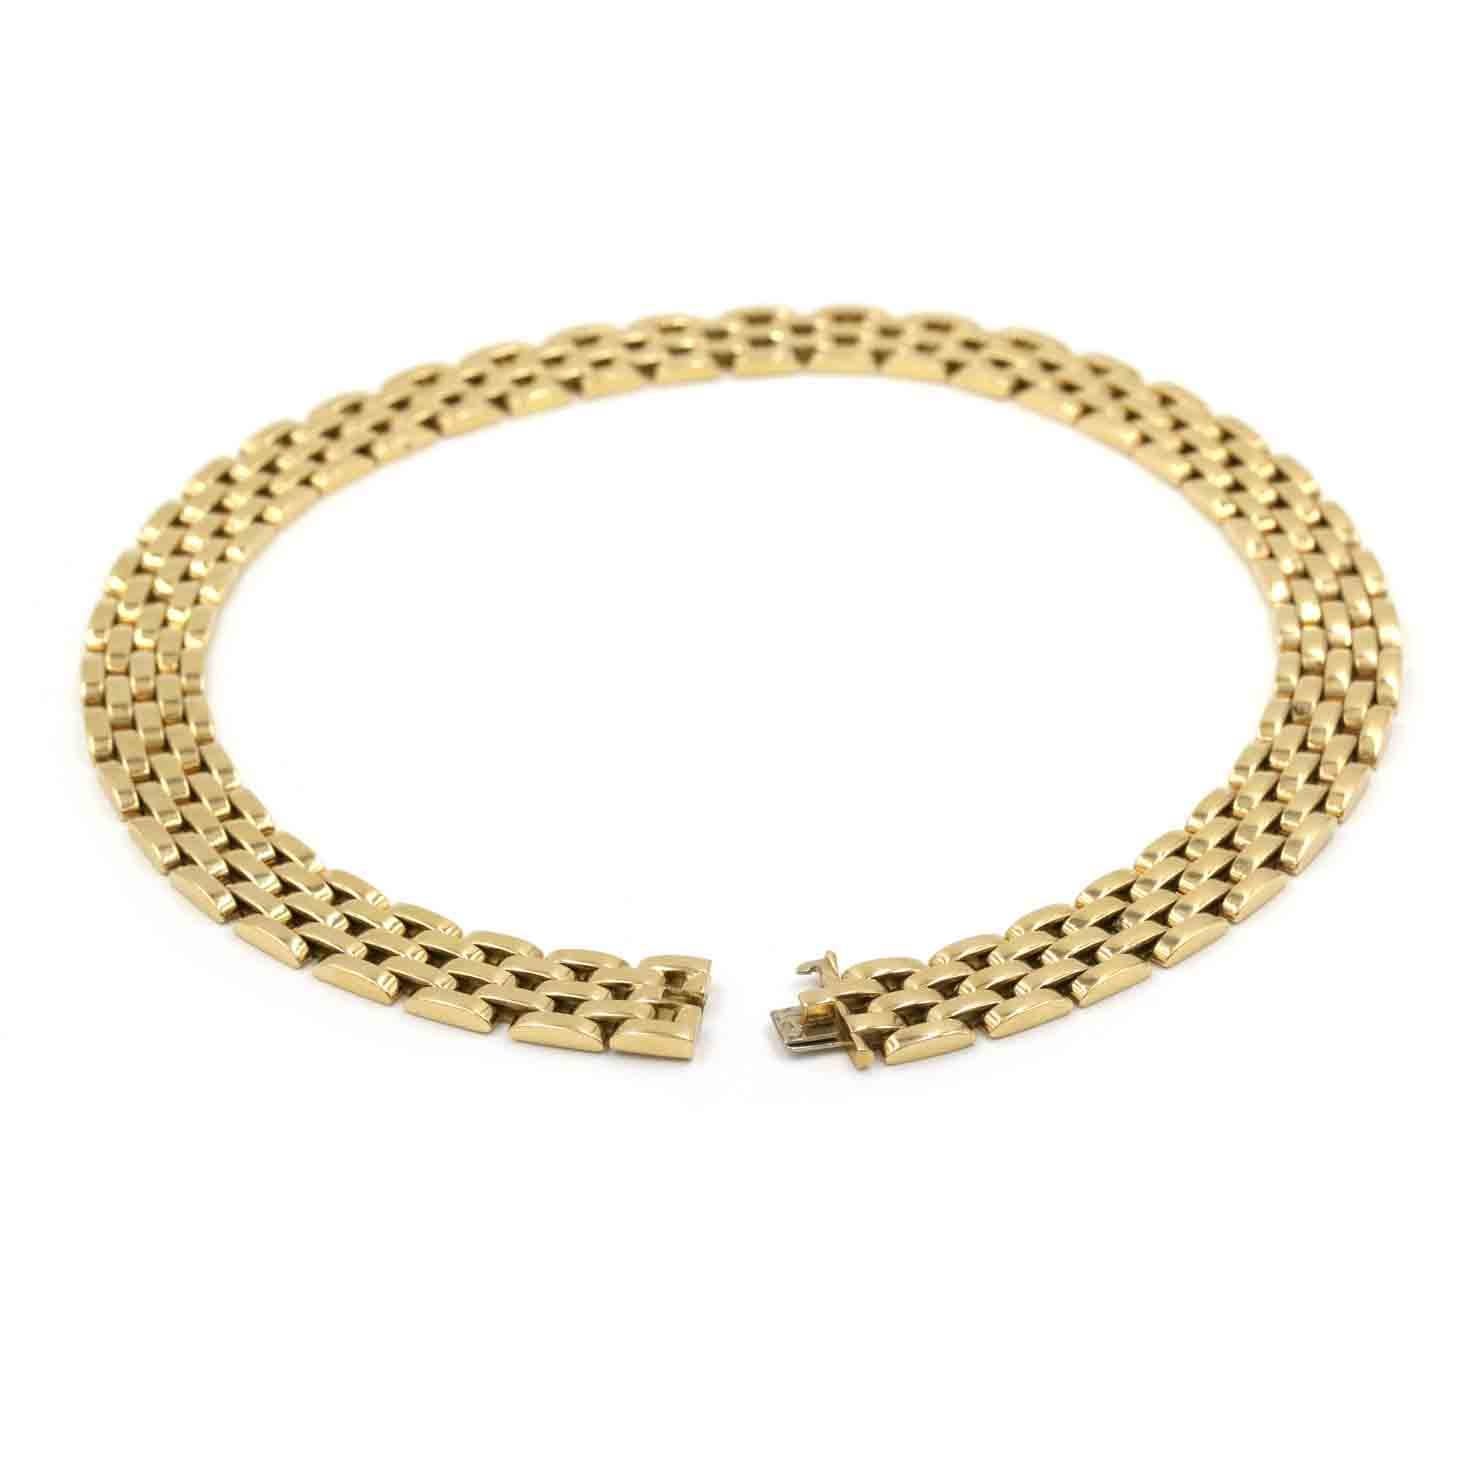 Art Deco Cartier Maillon Panthere 5 Row Necklace in 18K Yellow Gold